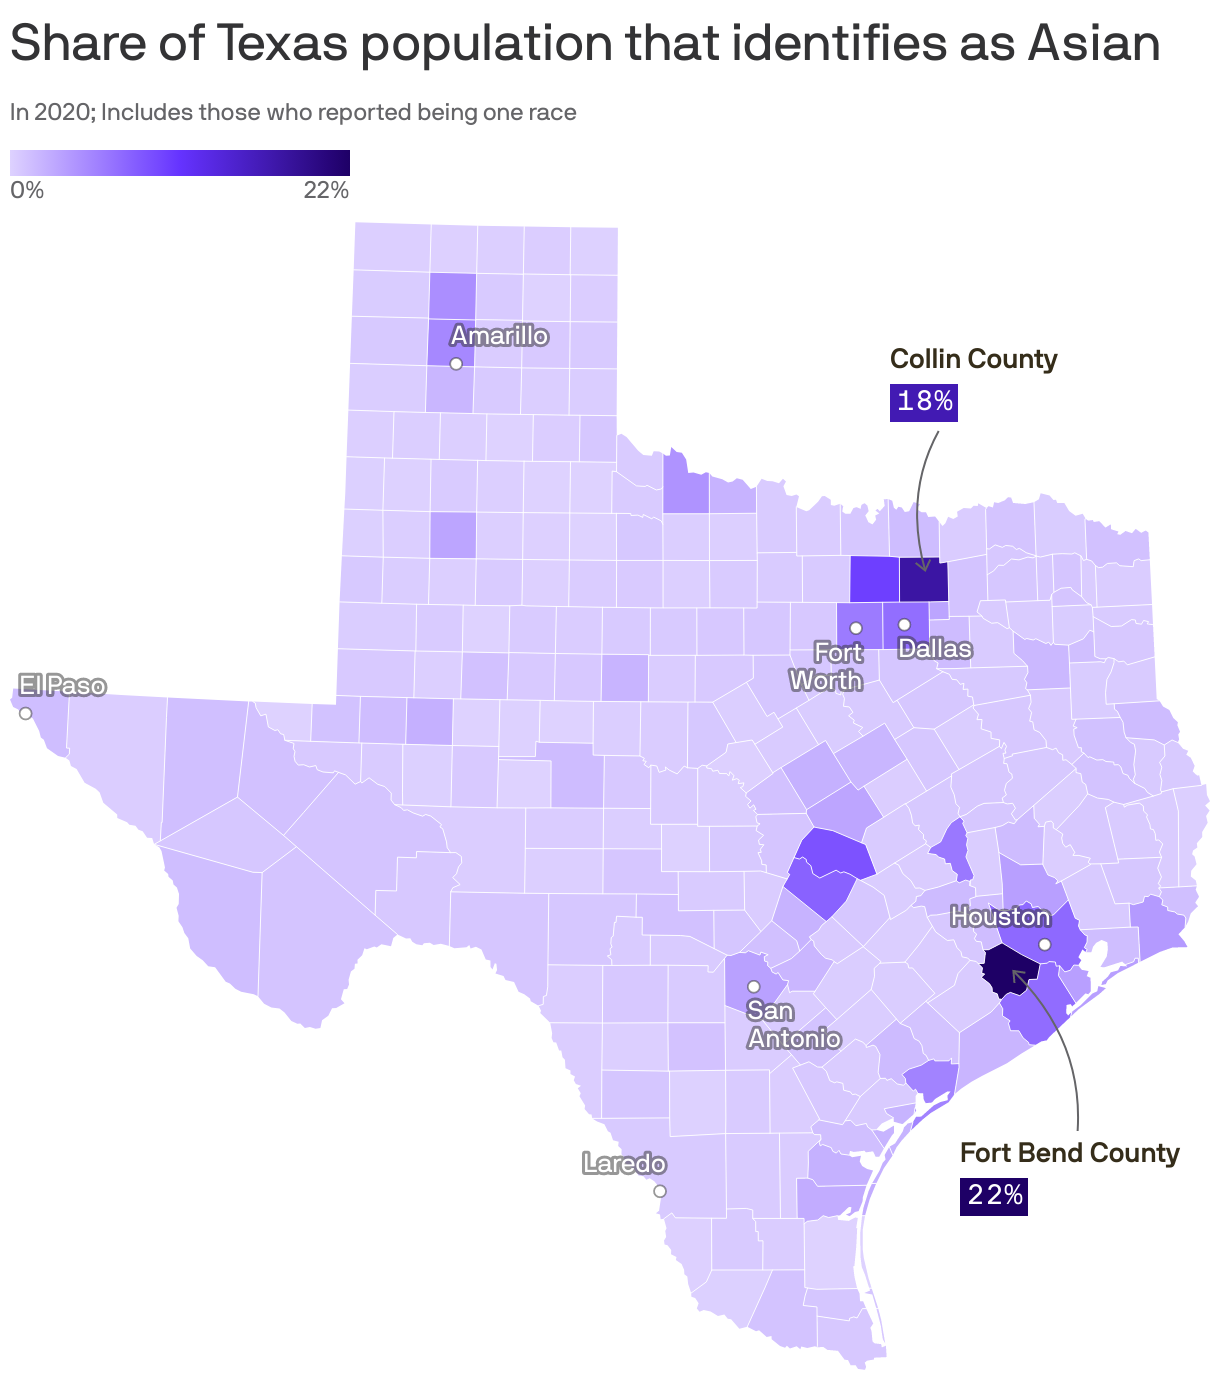 Share of Texas population that identifies as Asian